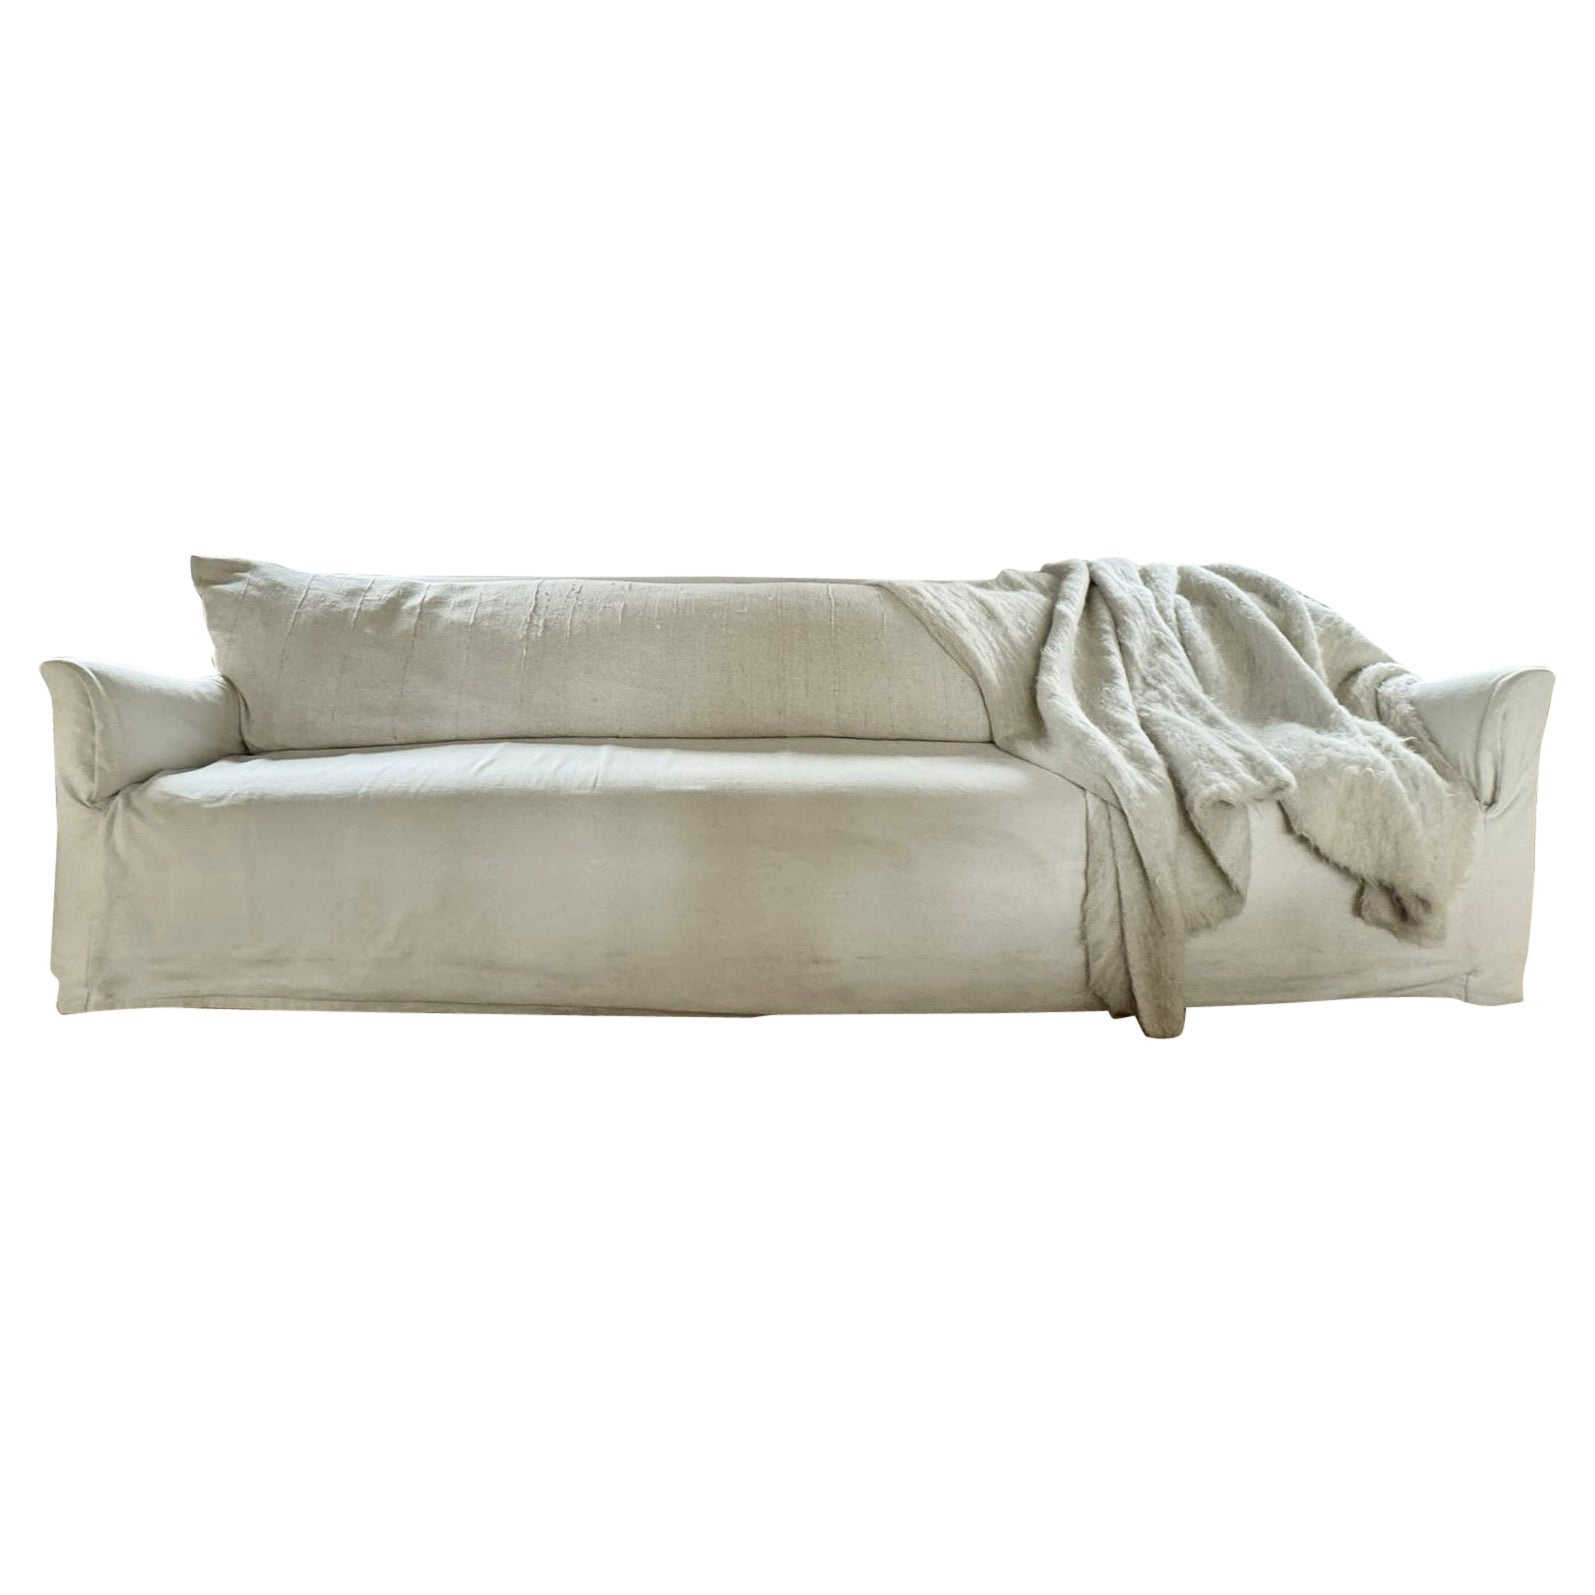 The Hamptons Slipcovered Sofa 9' by Michael Del Piero For Sale